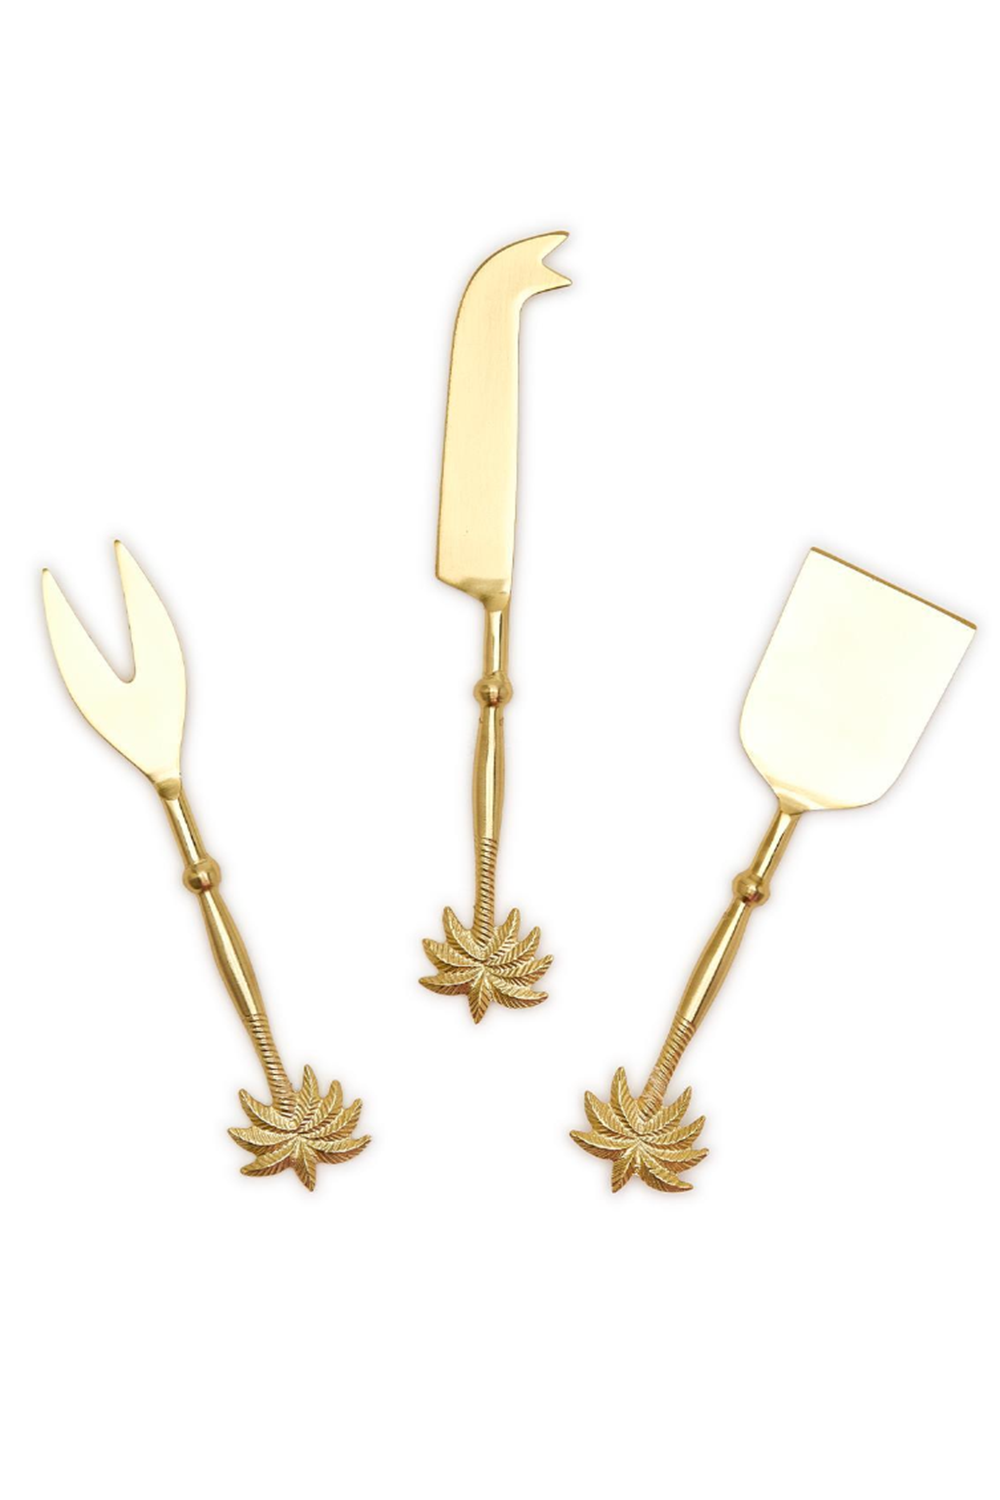 Palm Tree Cheese Knives Set of 3